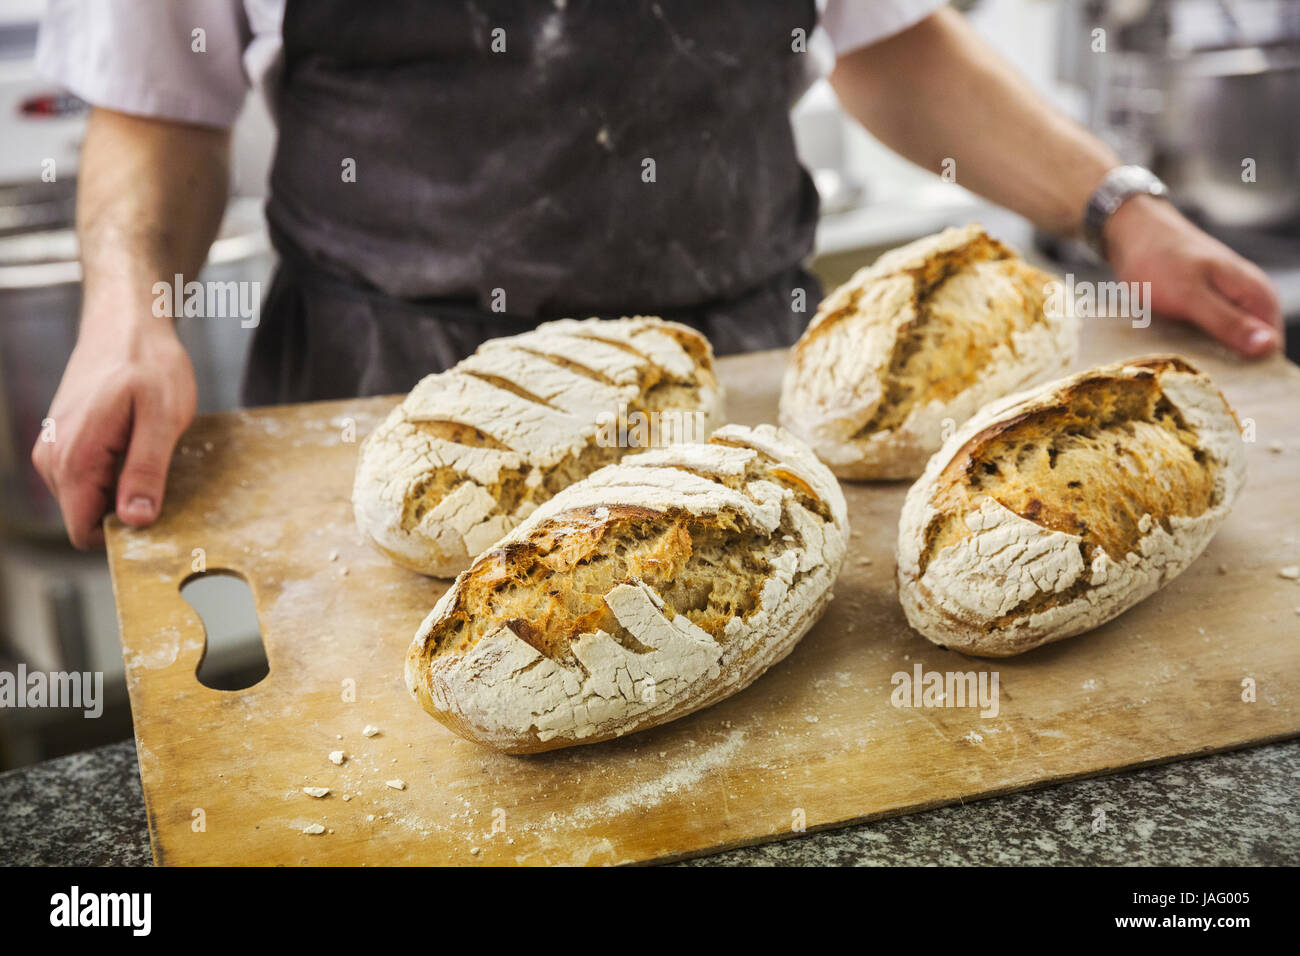 Baker holding tray with freshly baked loaves of bread. Stock Photo